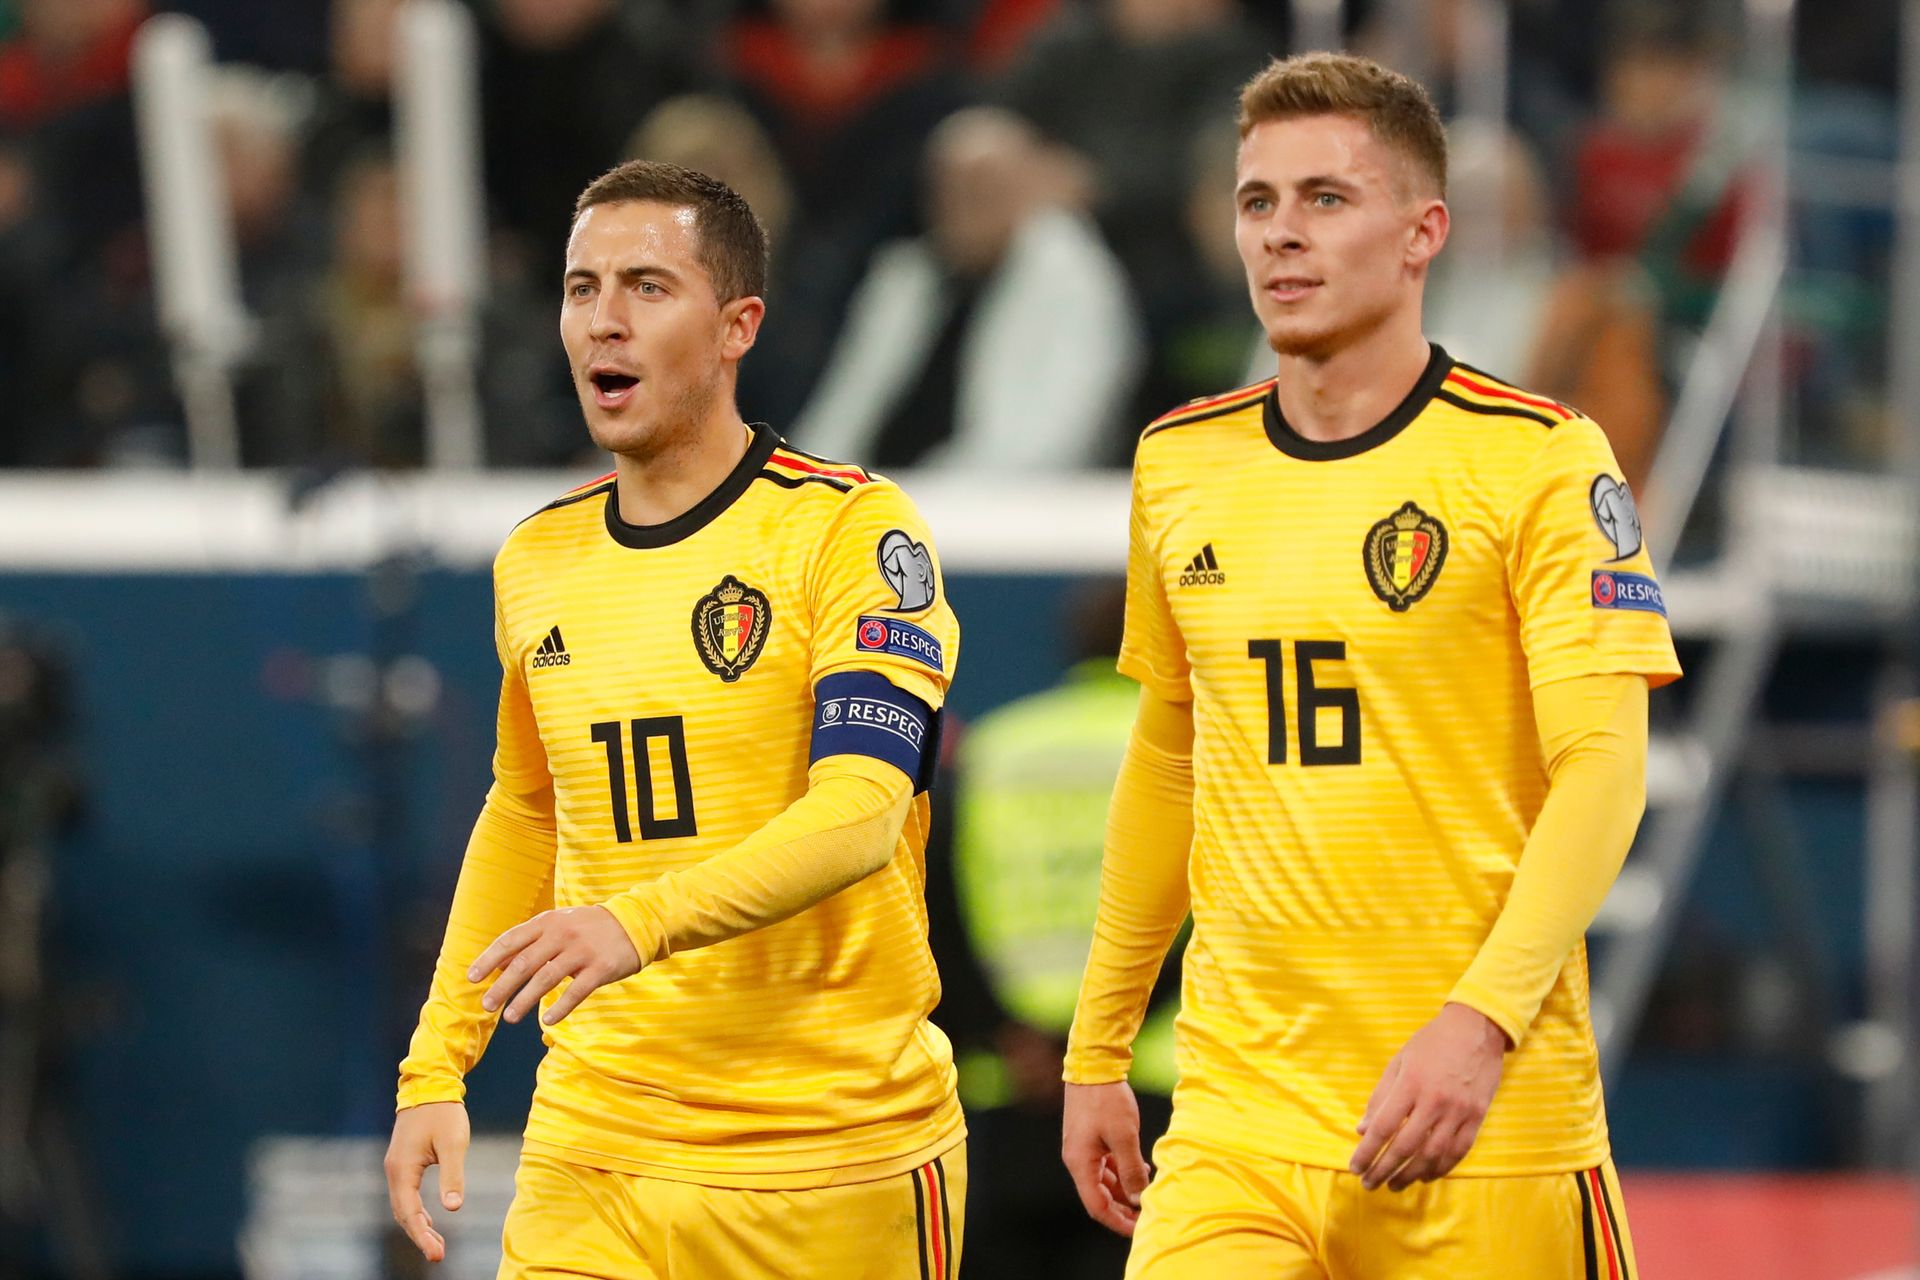 <p>                     Eden Hazard is one of the greatest players Belgium has produced and the former Chelsea attacker won over 100 caps for the Red Devils between 2008 and 2022.                   </p>                                      <p>                     His younger brother Thorgan has also had a solid career with the Belgian national team and has represented the likes of Borussia Monchengladbach, Borussia Dortmund and Anderlecht at club level.                   </p>